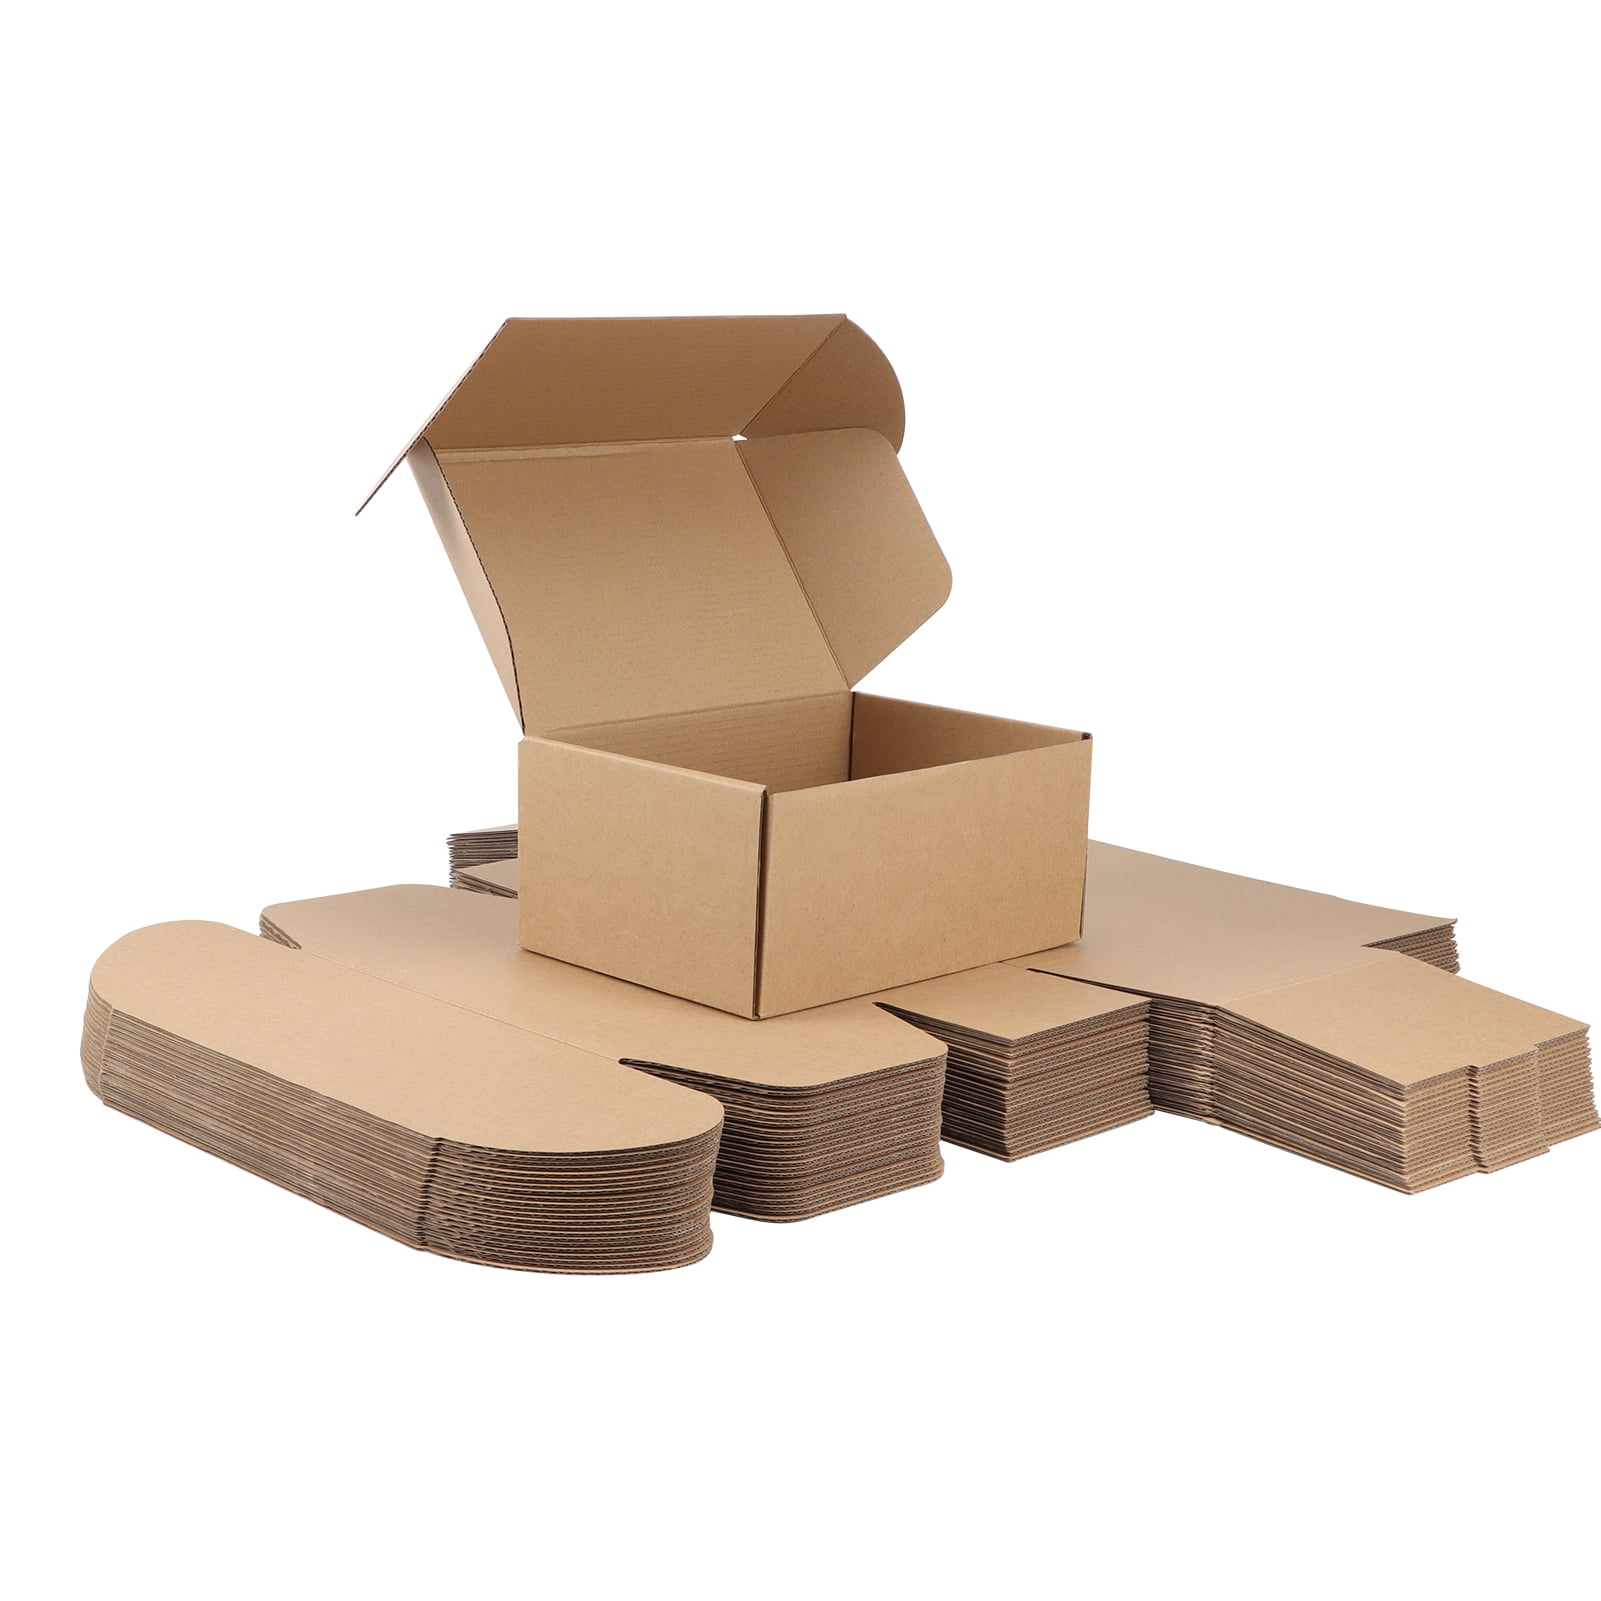 CARDBOARD Boxes Many Sizes! Large + Small Shipping Moving Mailing Packing  BOX